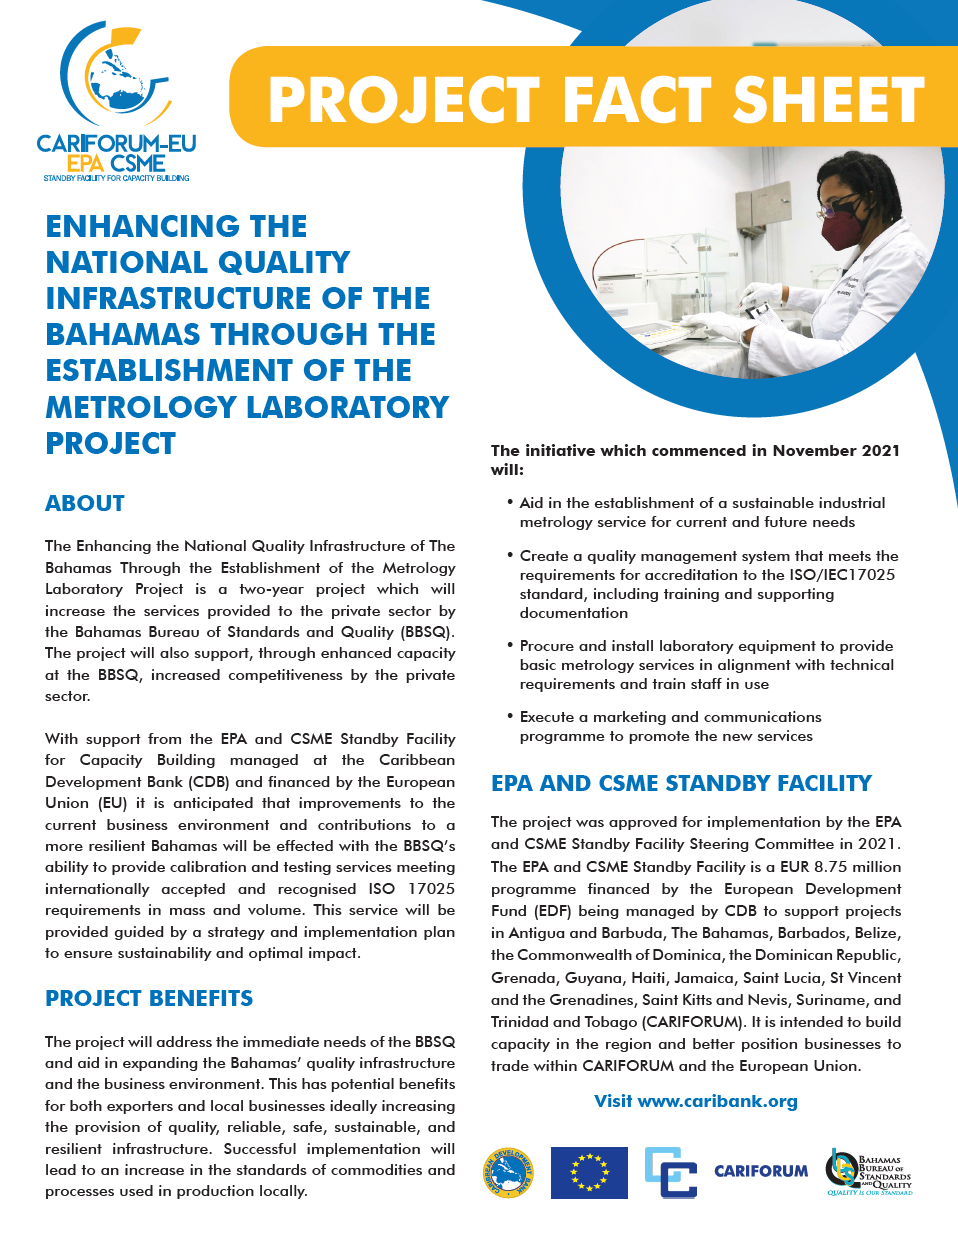 Enhancing the National Quality Infrastructure of The Bahamas through the Establishment of the Metrology Laboratory Fact Sheet